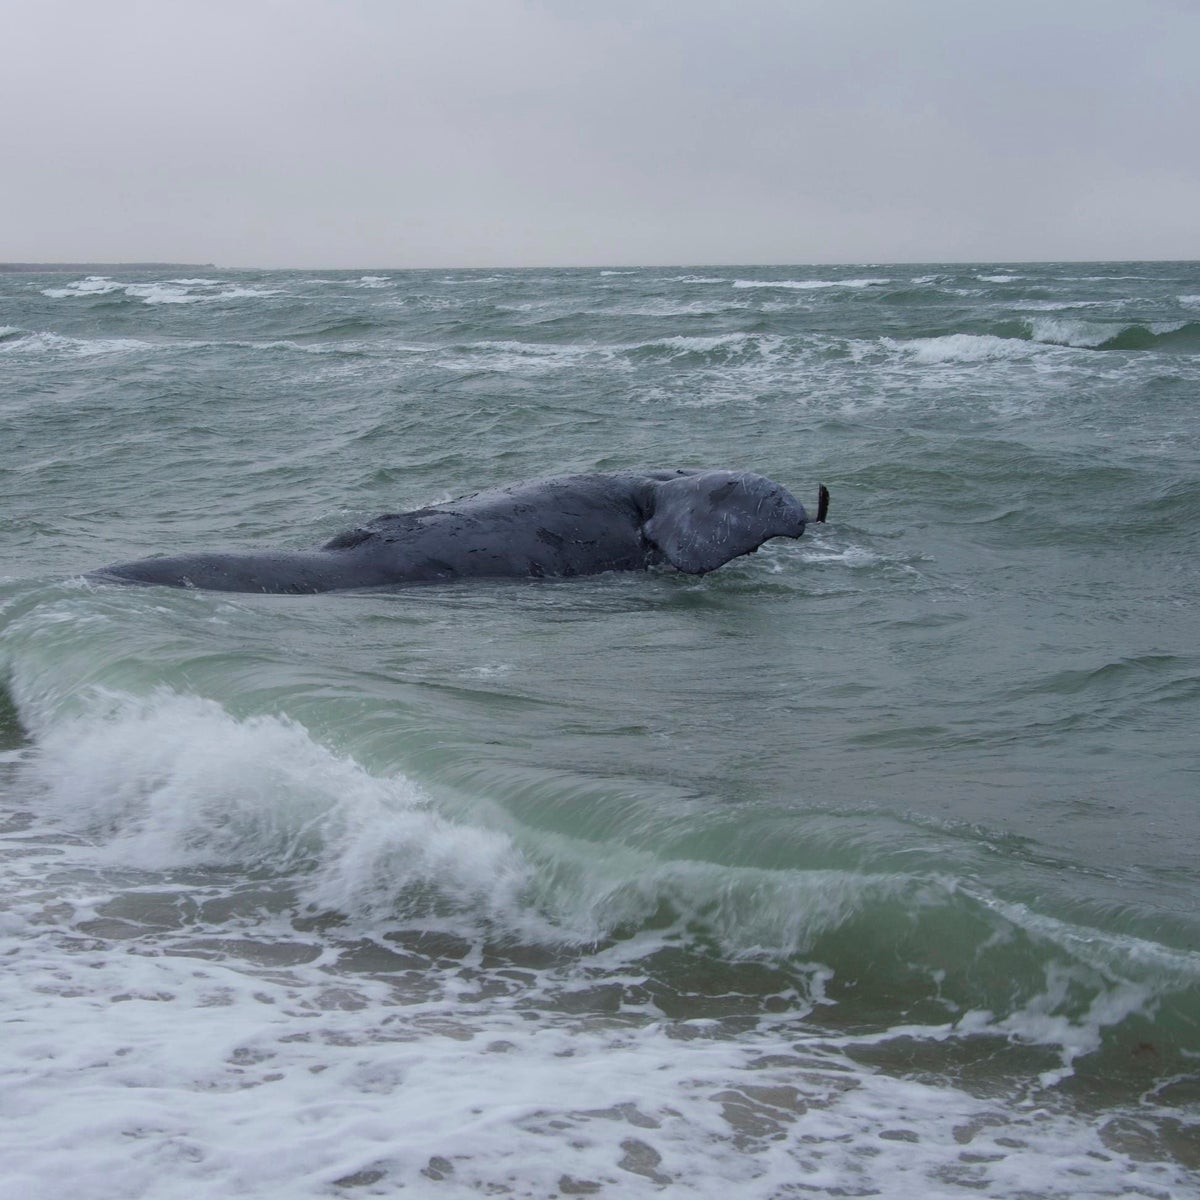 Rare whale found dead off Massachusetts may have been entangled, authorities say